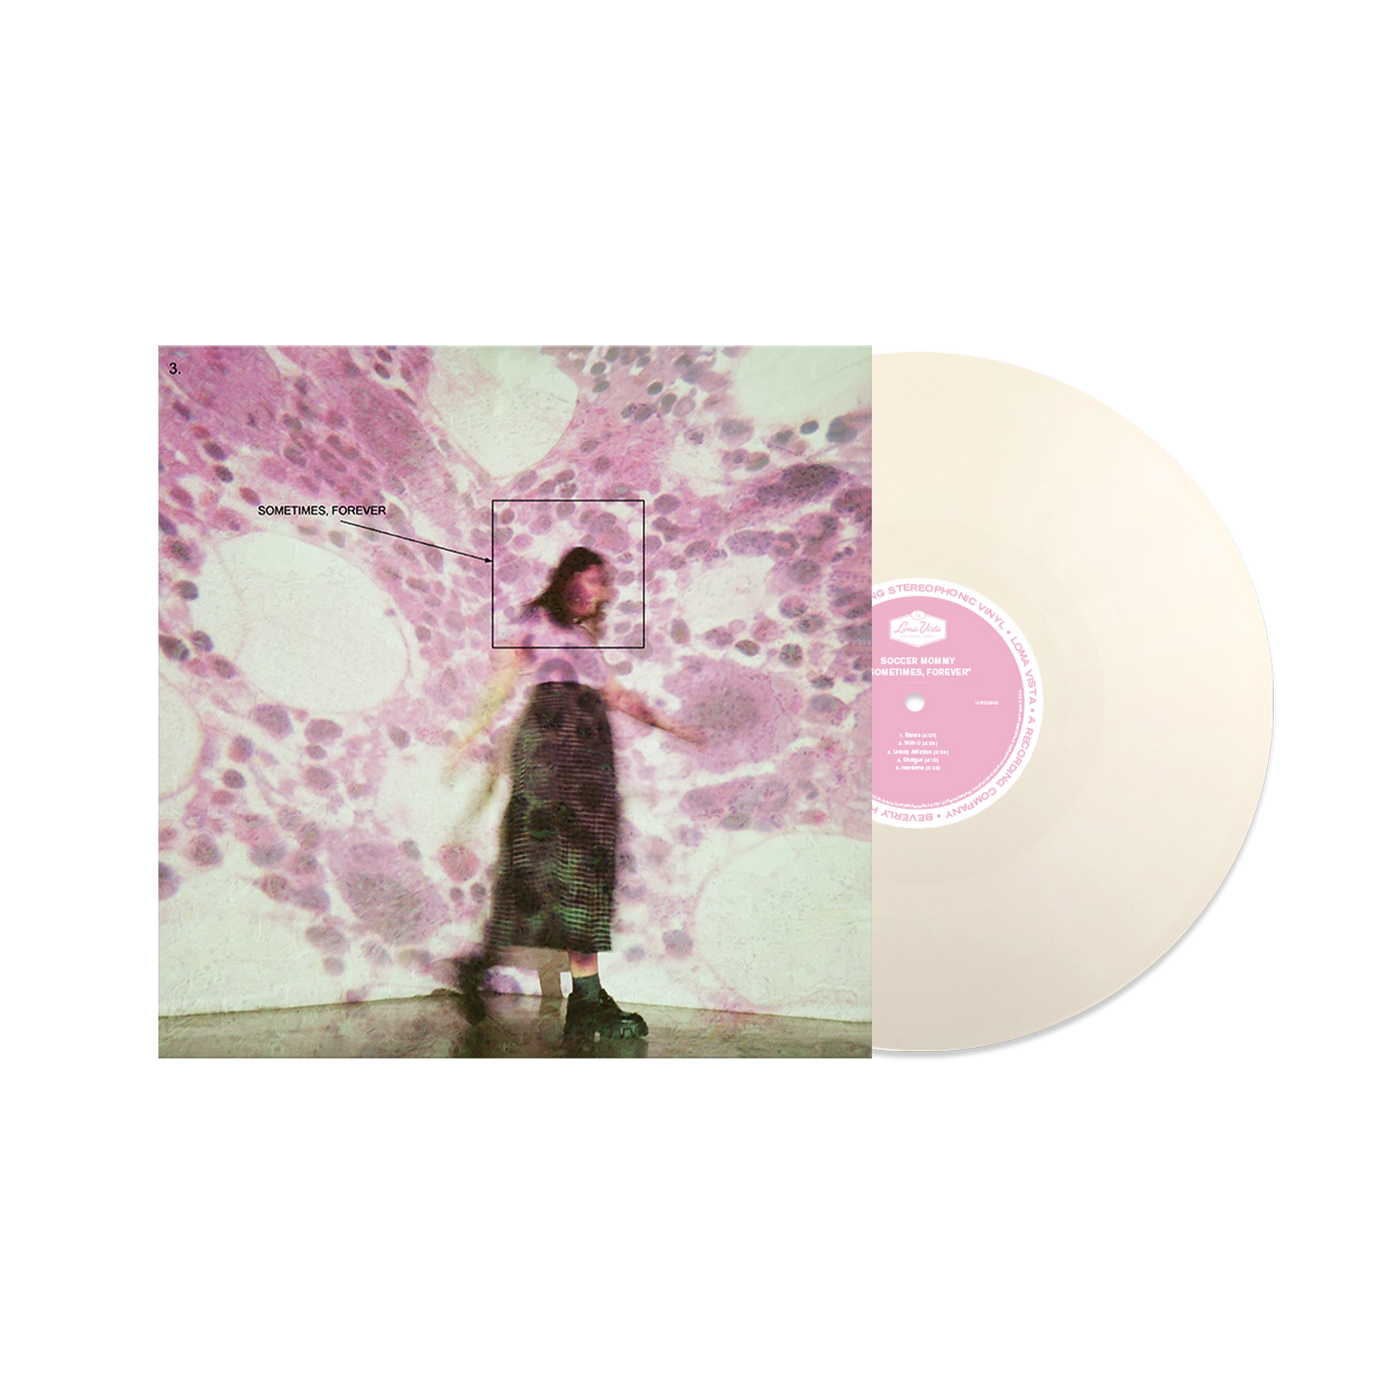 Sometimes, Forever Limited Edition "Bone" Colored Vinyl